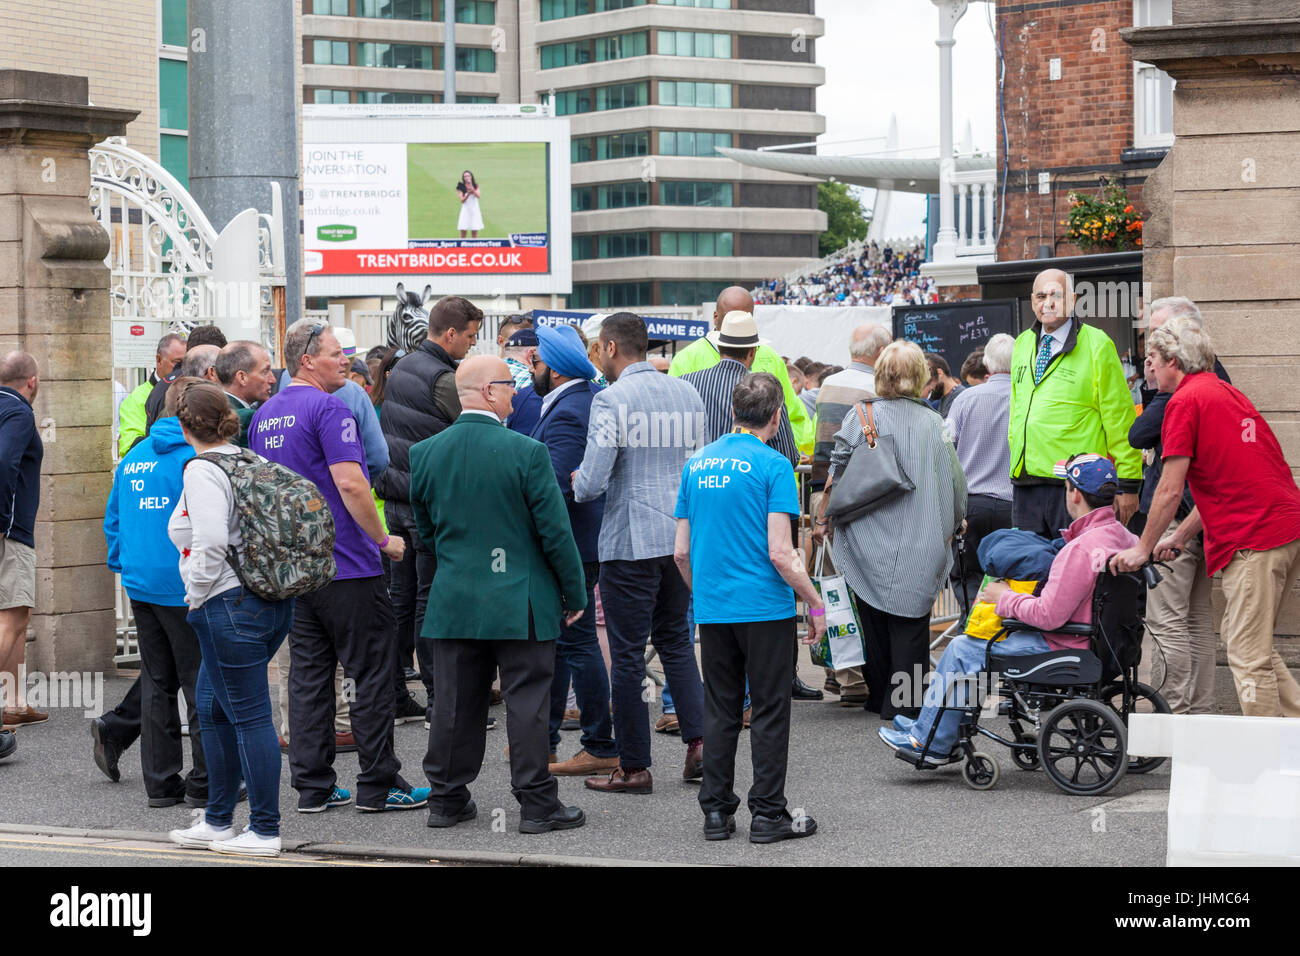 Trent Bridge, West Bridgford, Nottinghamshire, UK. 14th July 2017. Spectators arrive for the second Cricket test match between England and South Africa. Security around the ground was increased following recent events. Credit: Martyn Williams /Alamy Live News Stock Photo